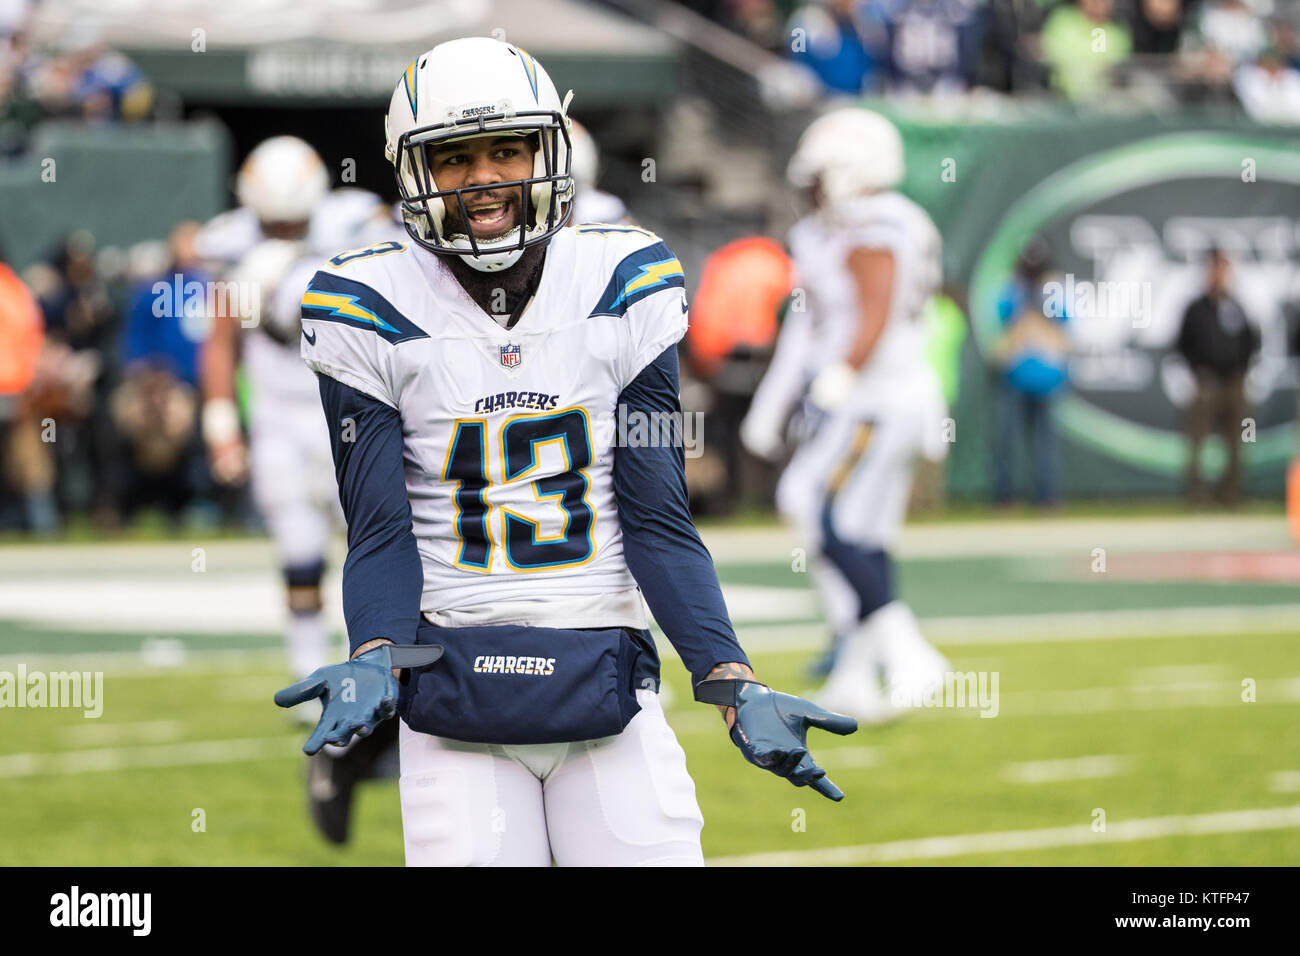 East Rutherford, New Jersey, USA. 24th Dec, 2017. Los Angeles Chargers wide receiver Keenan Allen (13) reacts to not getting a flag during the NFL game between the Los Angeles Chargers and the New York Jets at MetLife Stadium in East Rutherford, New Jersey. Christopher Szagola/CSM/Alamy Live News Stock Photo